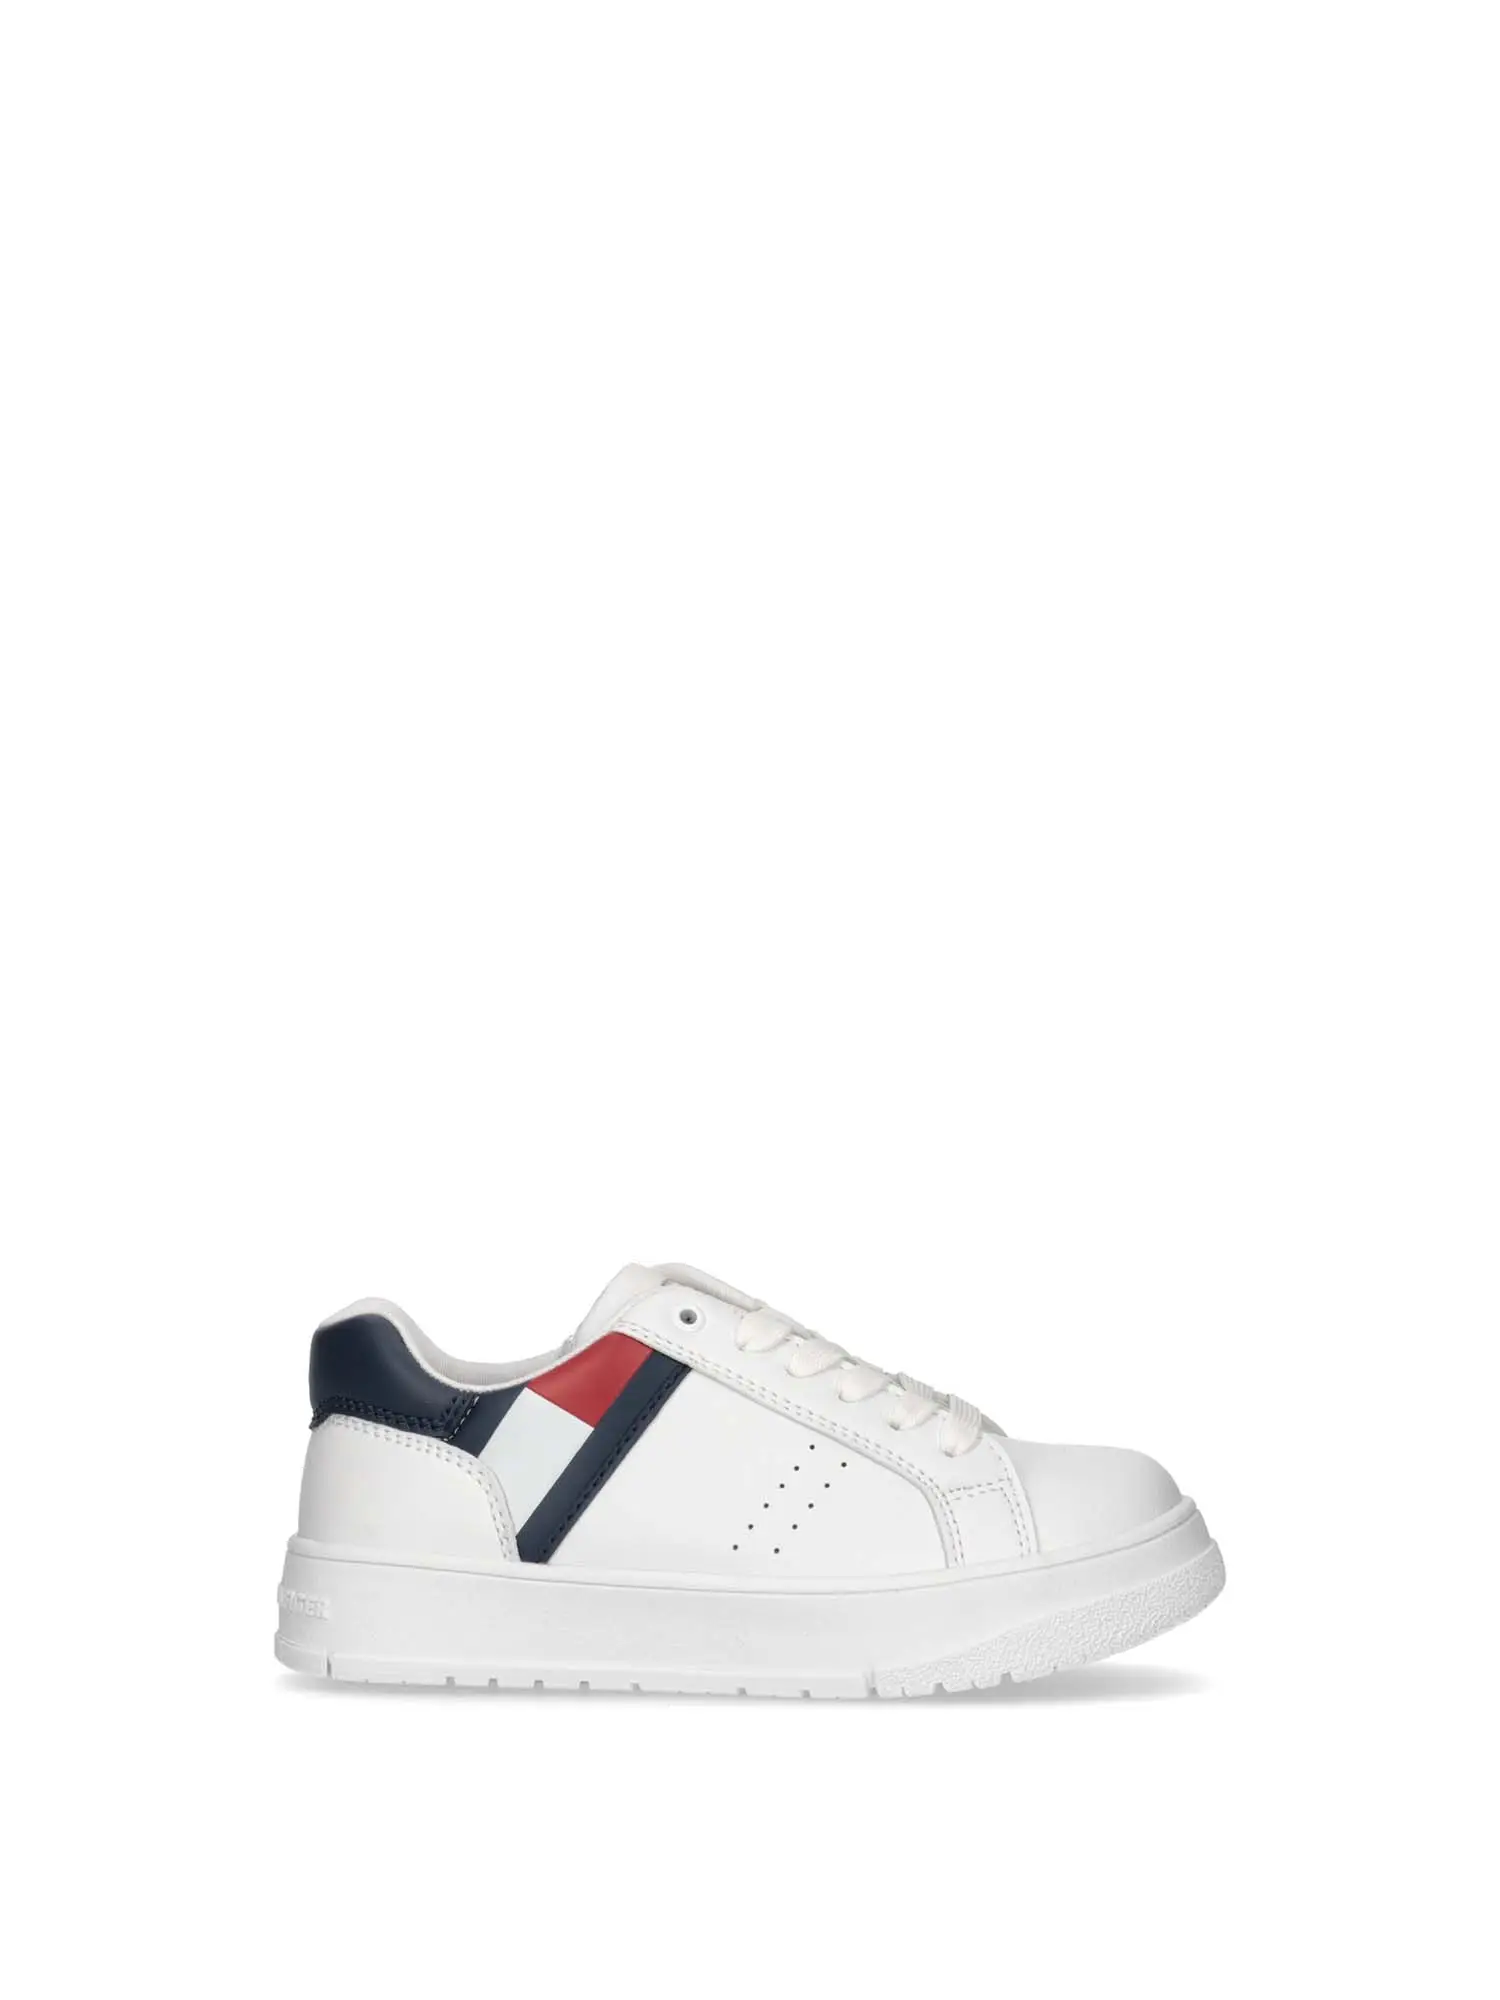 SNEAKERS UNISEX - TOMMY HILFIGER - T3X9-33356-1355 - BIANCO, 31